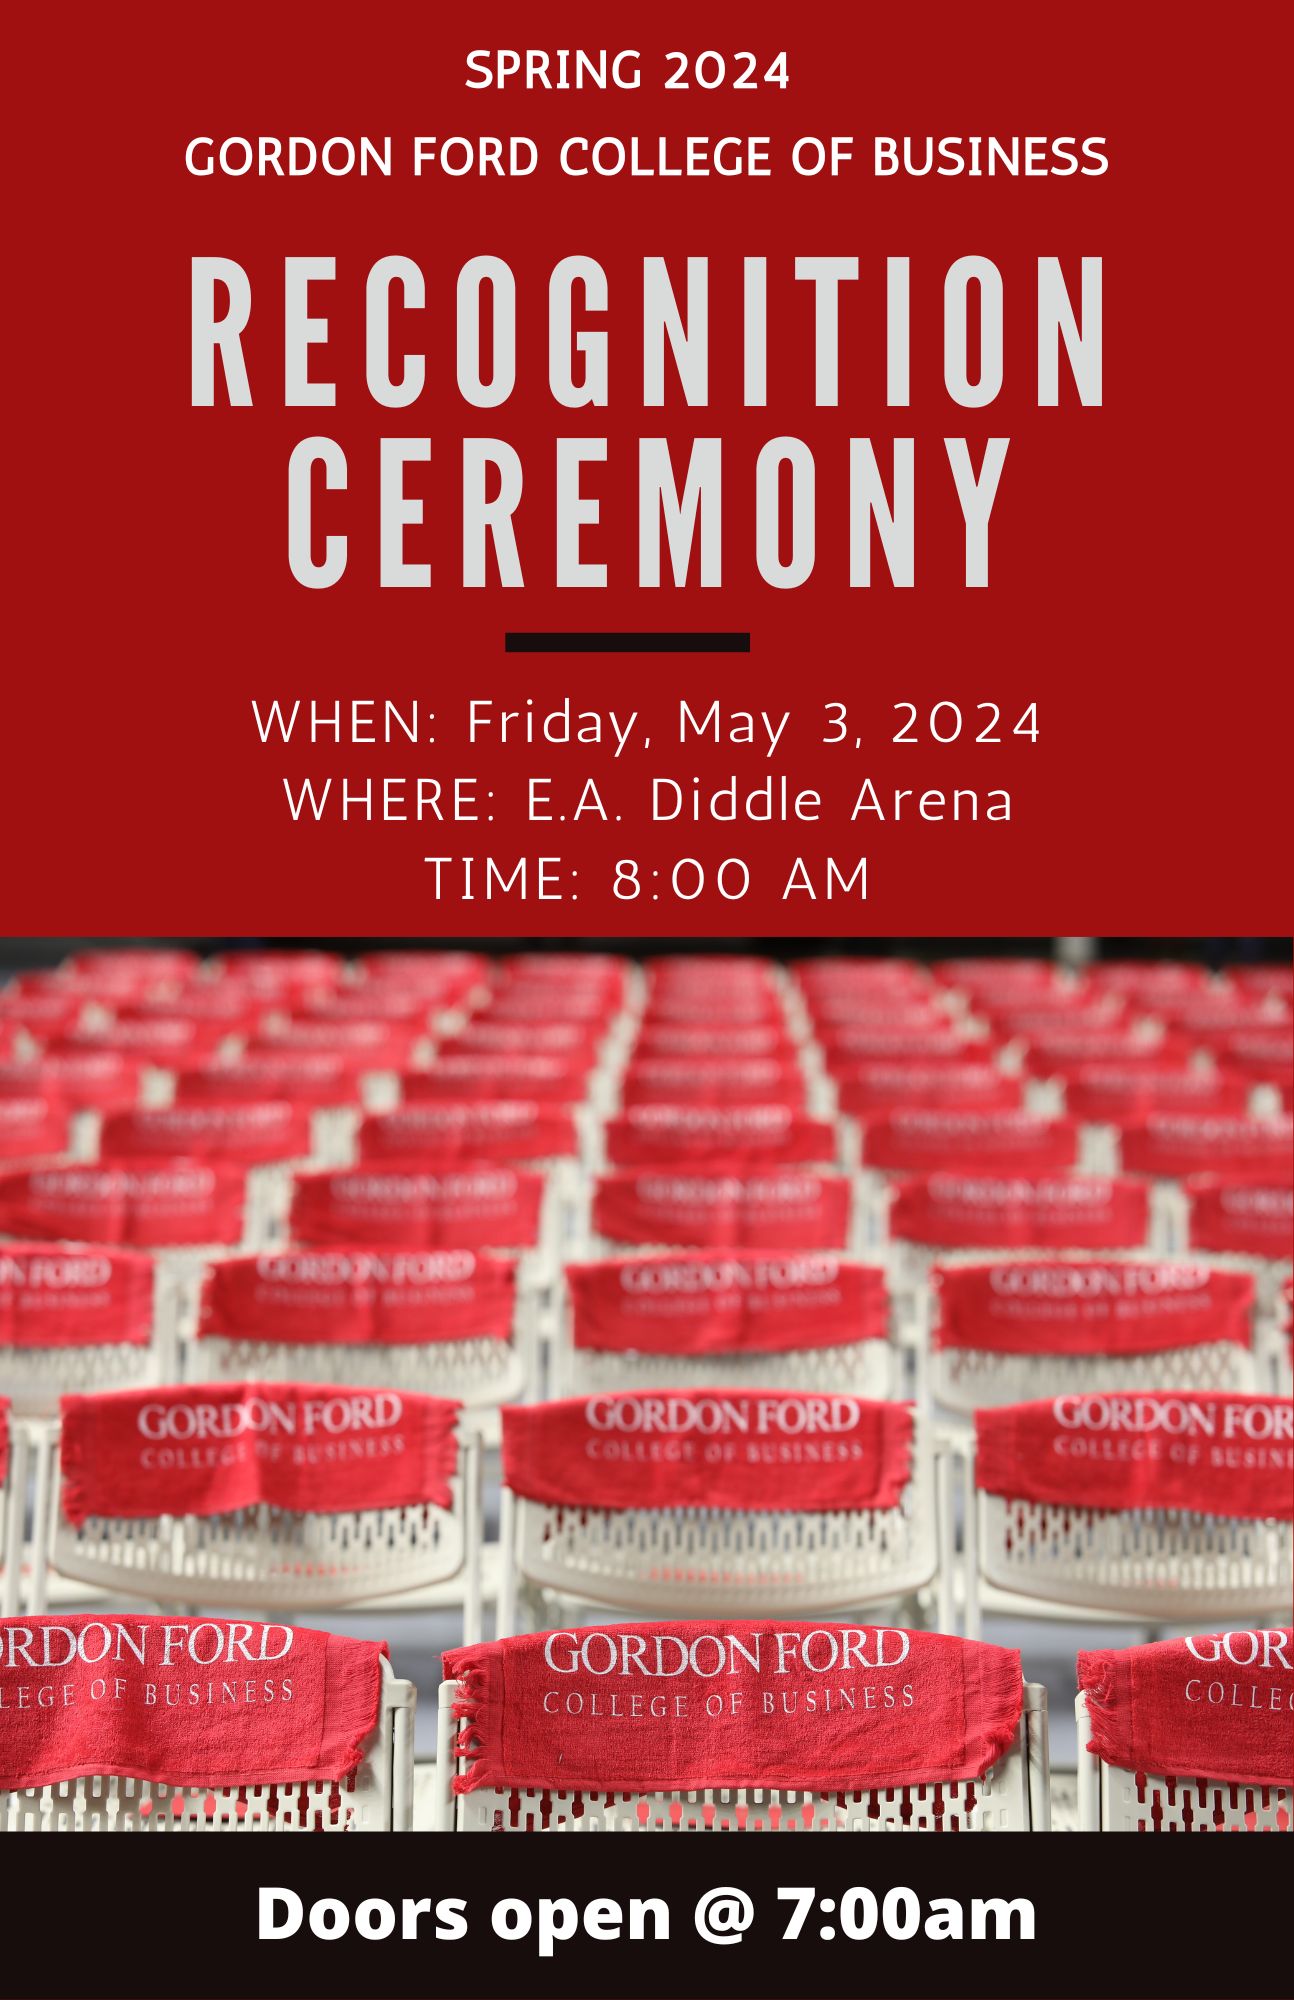 GFCB recognition ceremony is Friday May 3rd at 8:00am in Diddle Arena. Doors open at 7:00am